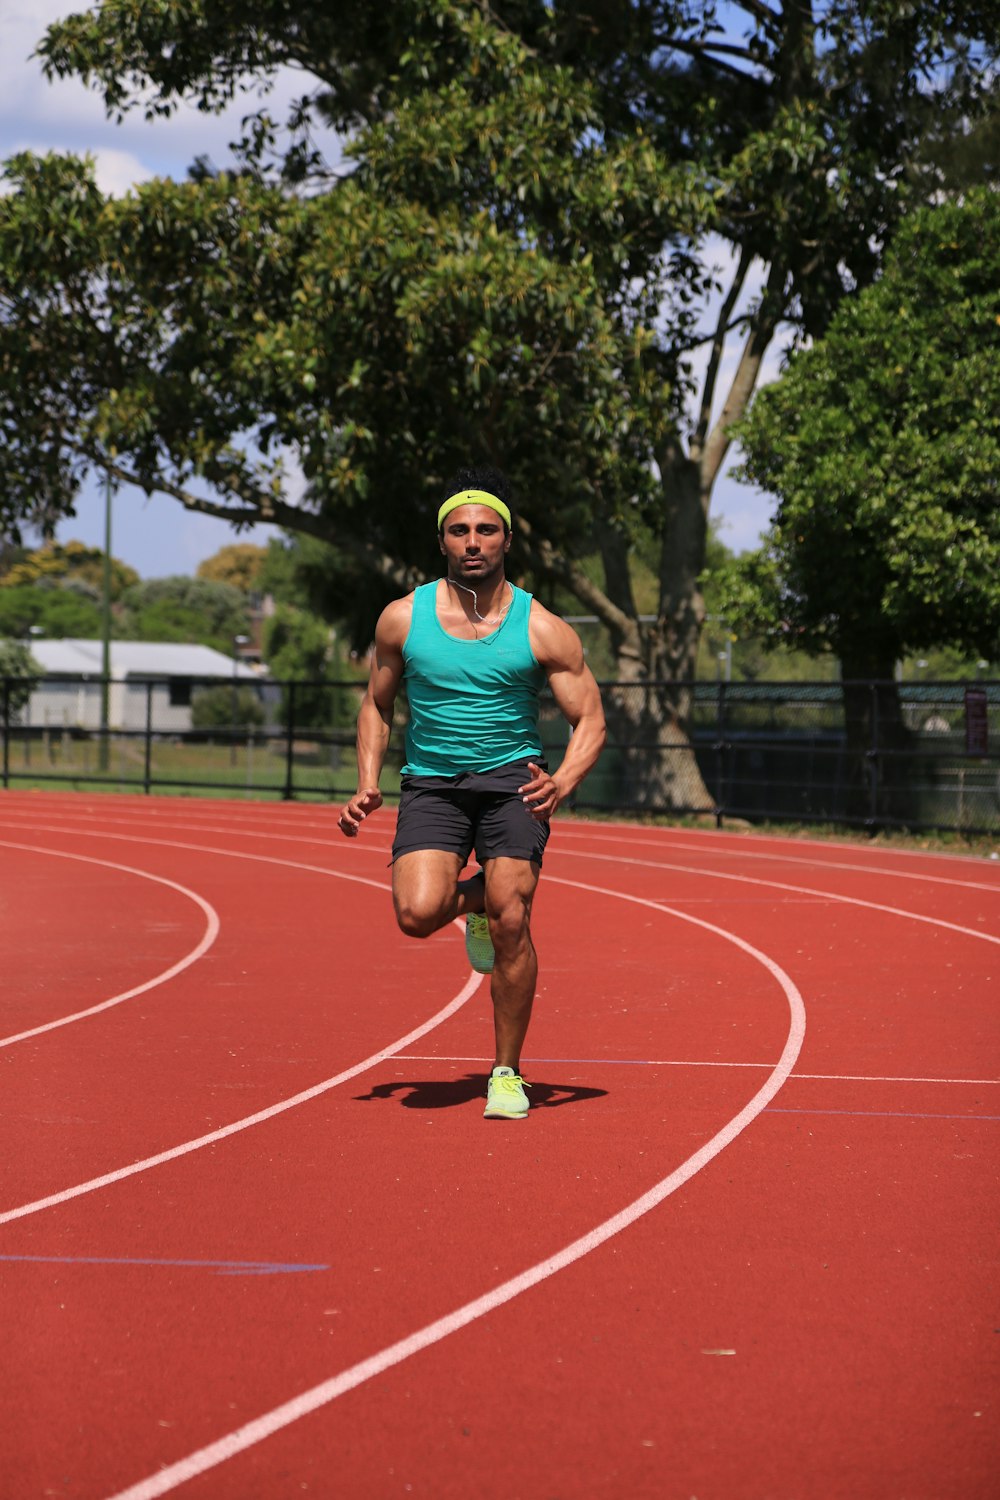 man in green tank top running on track field during daytime